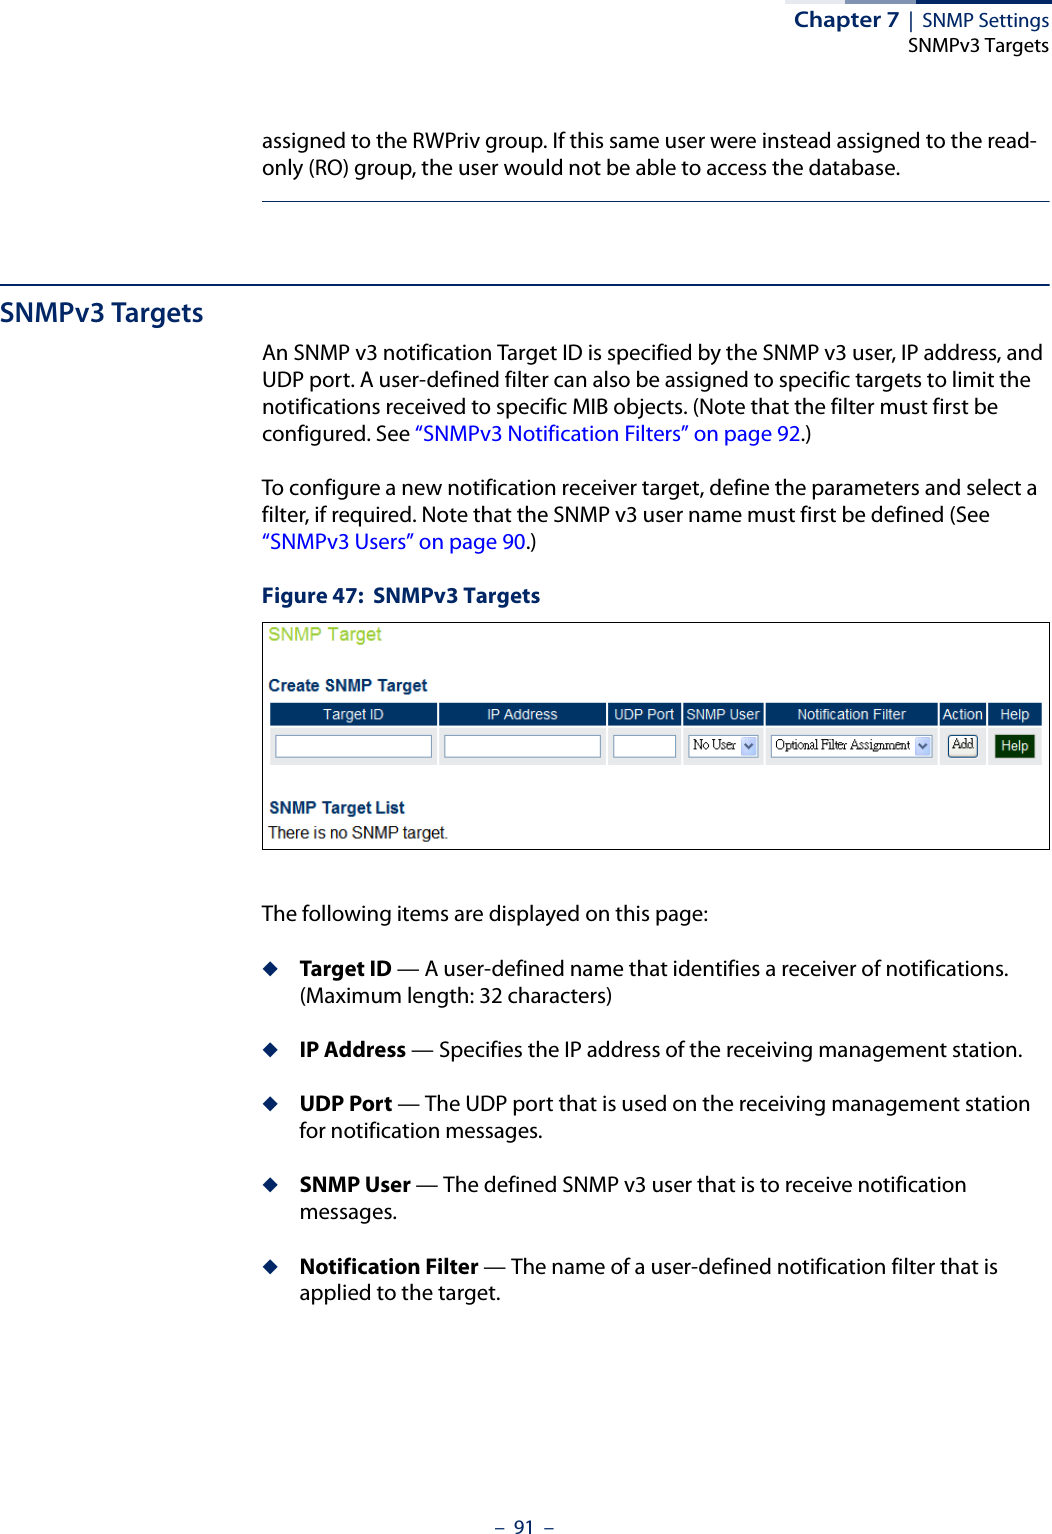 Chapter 7  |  SNMP SettingsSNMPv3 Targets–  91  –assigned to the RWPriv group. If this same user were instead assigned to the read-only (RO) group, the user would not be able to access the database.SNMPv3 TargetsAn SNMP v3 notification Target ID is specified by the SNMP v3 user, IP address, and UDP port. A user-defined filter can also be assigned to specific targets to limit the notifications received to specific MIB objects. (Note that the filter must first be configured. See “SNMPv3 Notification Filters” on page 92.)To configure a new notification receiver target, define the parameters and select a filter, if required. Note that the SNMP v3 user name must first be defined (See “SNMPv3 Users” on page 90.)Figure 47:  SNMPv3 TargetsThe following items are displayed on this page:◆Target ID — A user-defined name that identifies a receiver of notifications. (Maximum length: 32 characters)◆IP Address — Specifies the IP address of the receiving management station.◆UDP Port — The UDP port that is used on the receiving management station for notification messages.◆SNMP User — The defined SNMP v3 user that is to receive notification messages.◆Notification Filter — The name of a user-defined notification filter that is applied to the target.